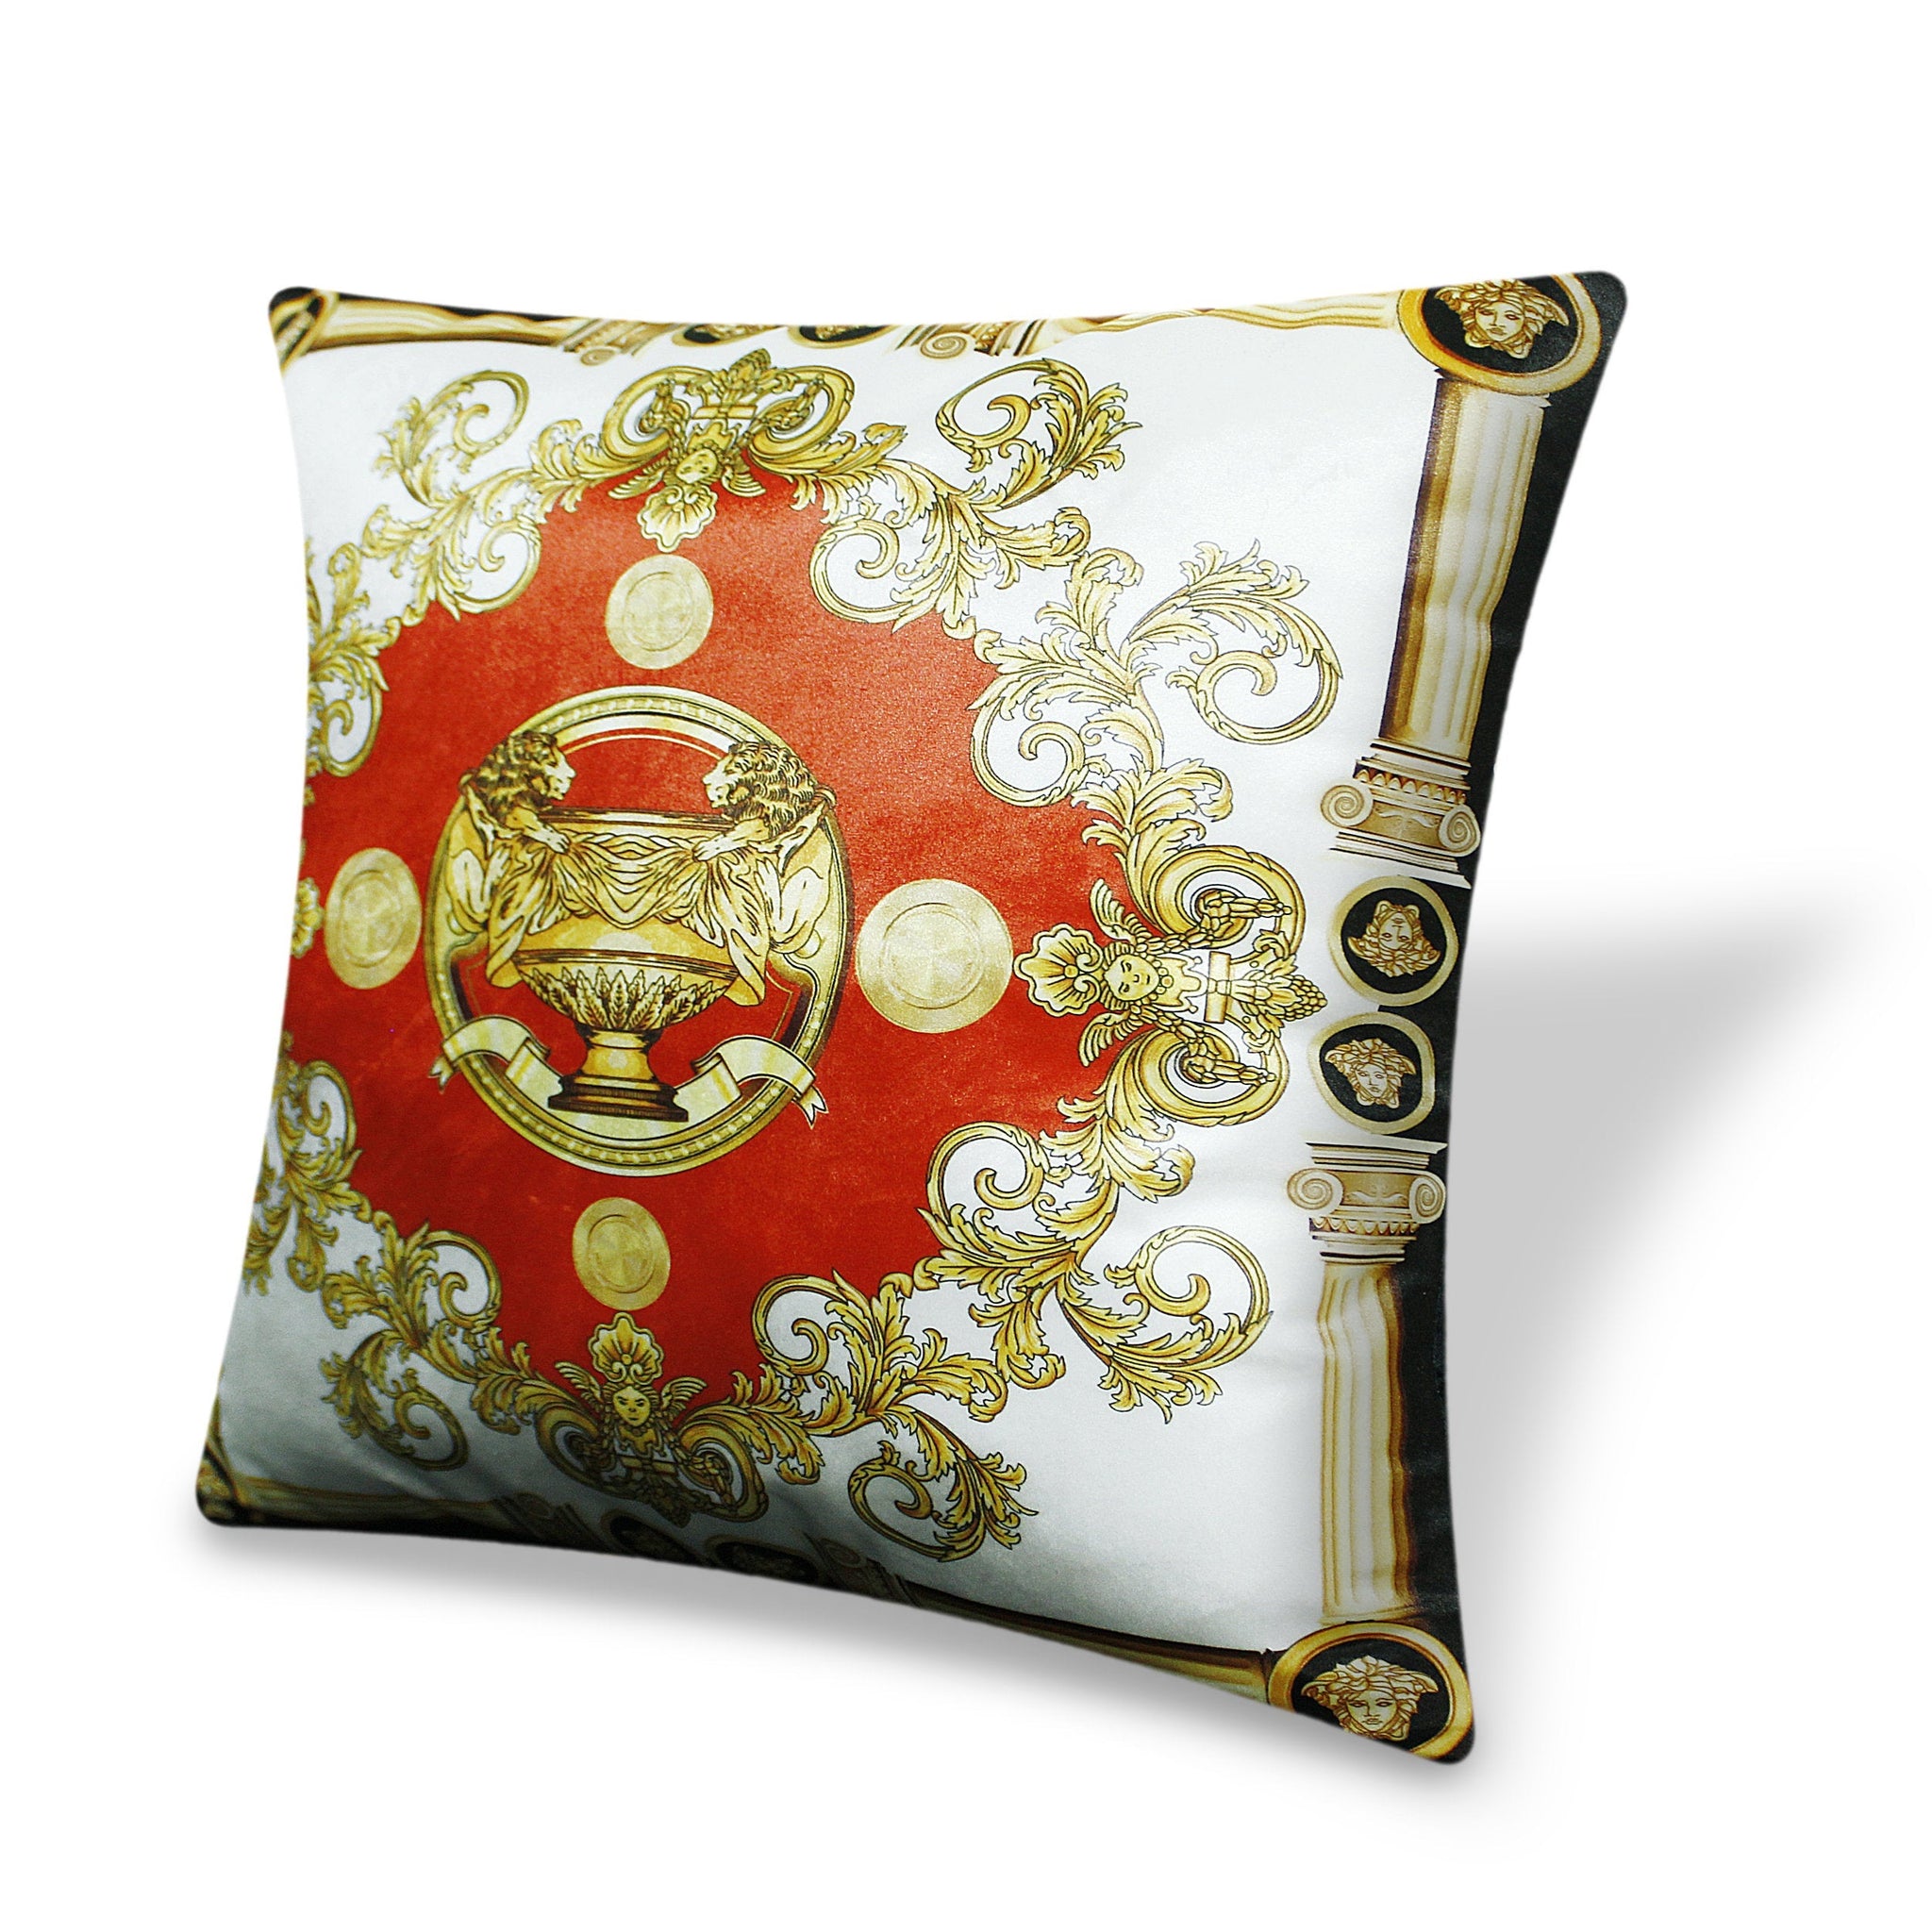 Golden Velvet Cushion Cover Baroque Style Antique Cup Decorative Pillowcase Home Decor Throw Pillow for Sofa Chair Living Room 45x45 cm 18x18 In